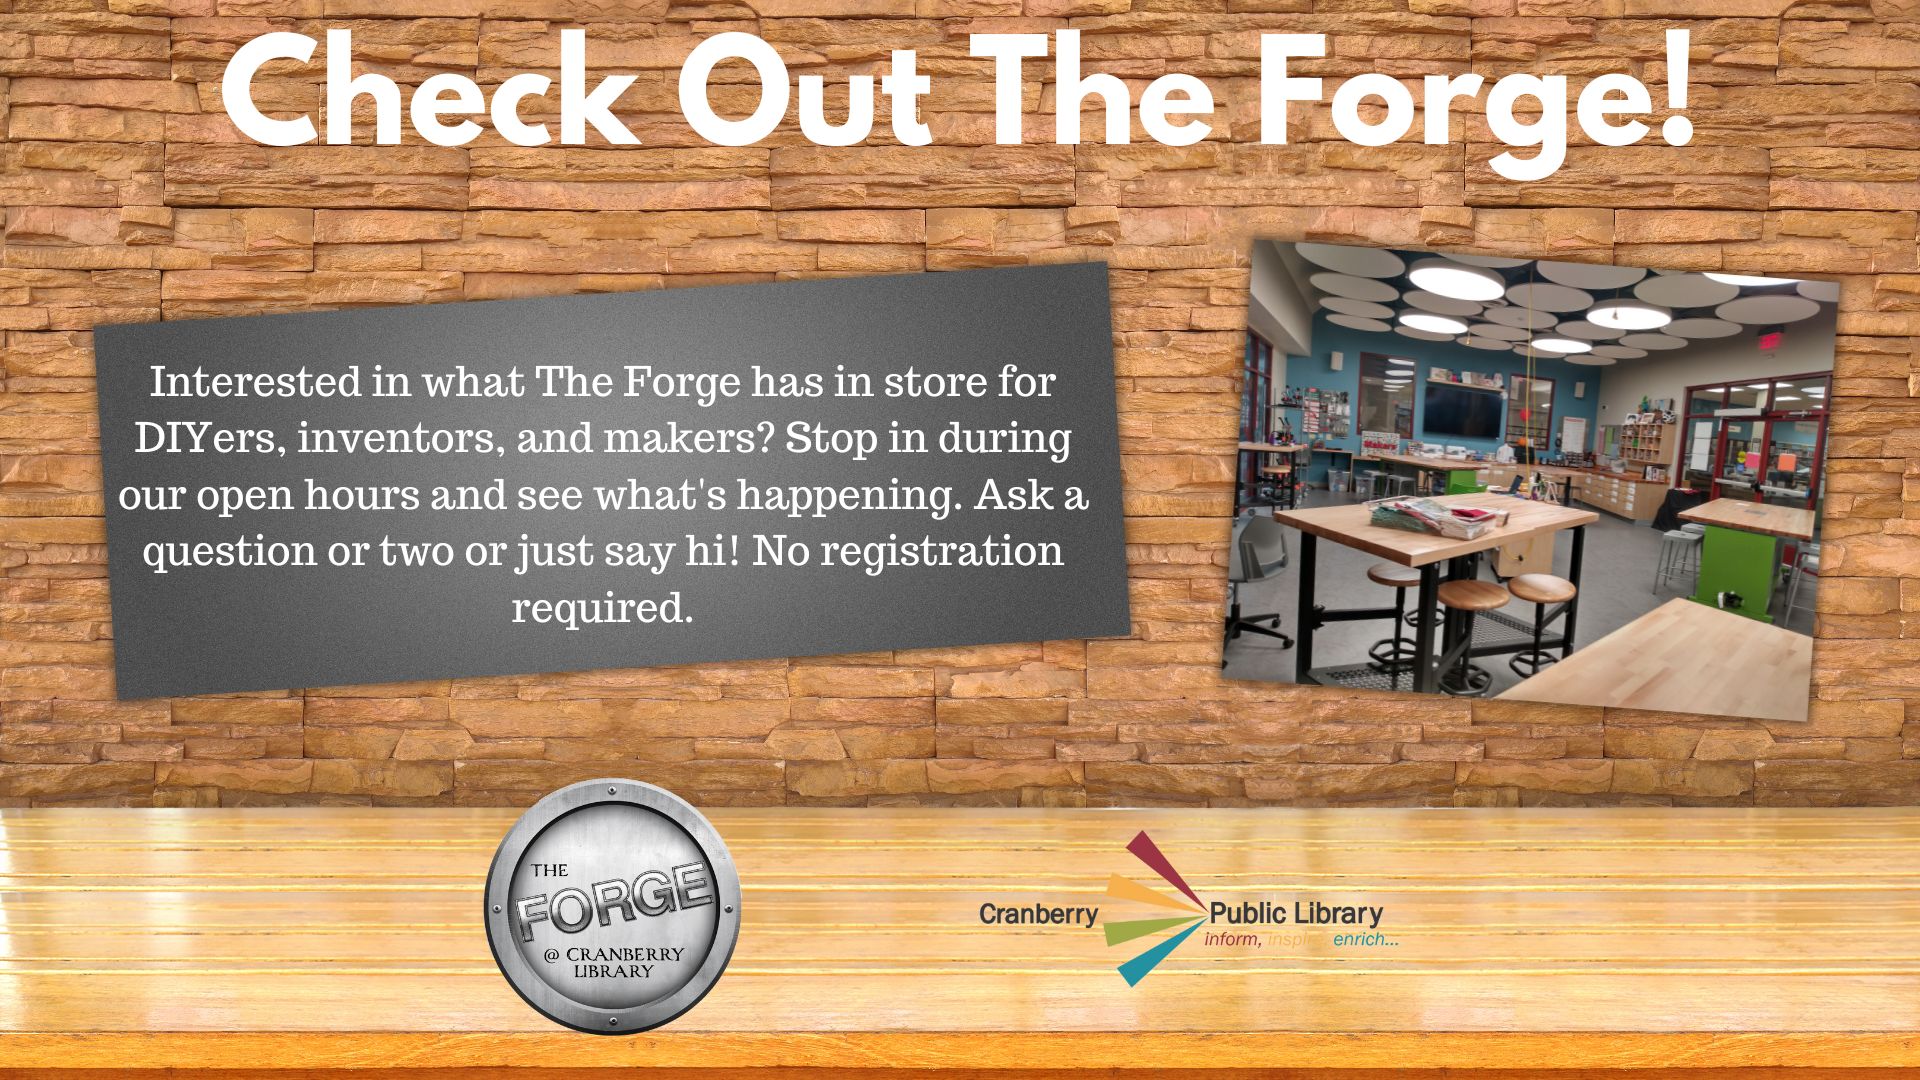 Flyer for Check Out The Forge open house